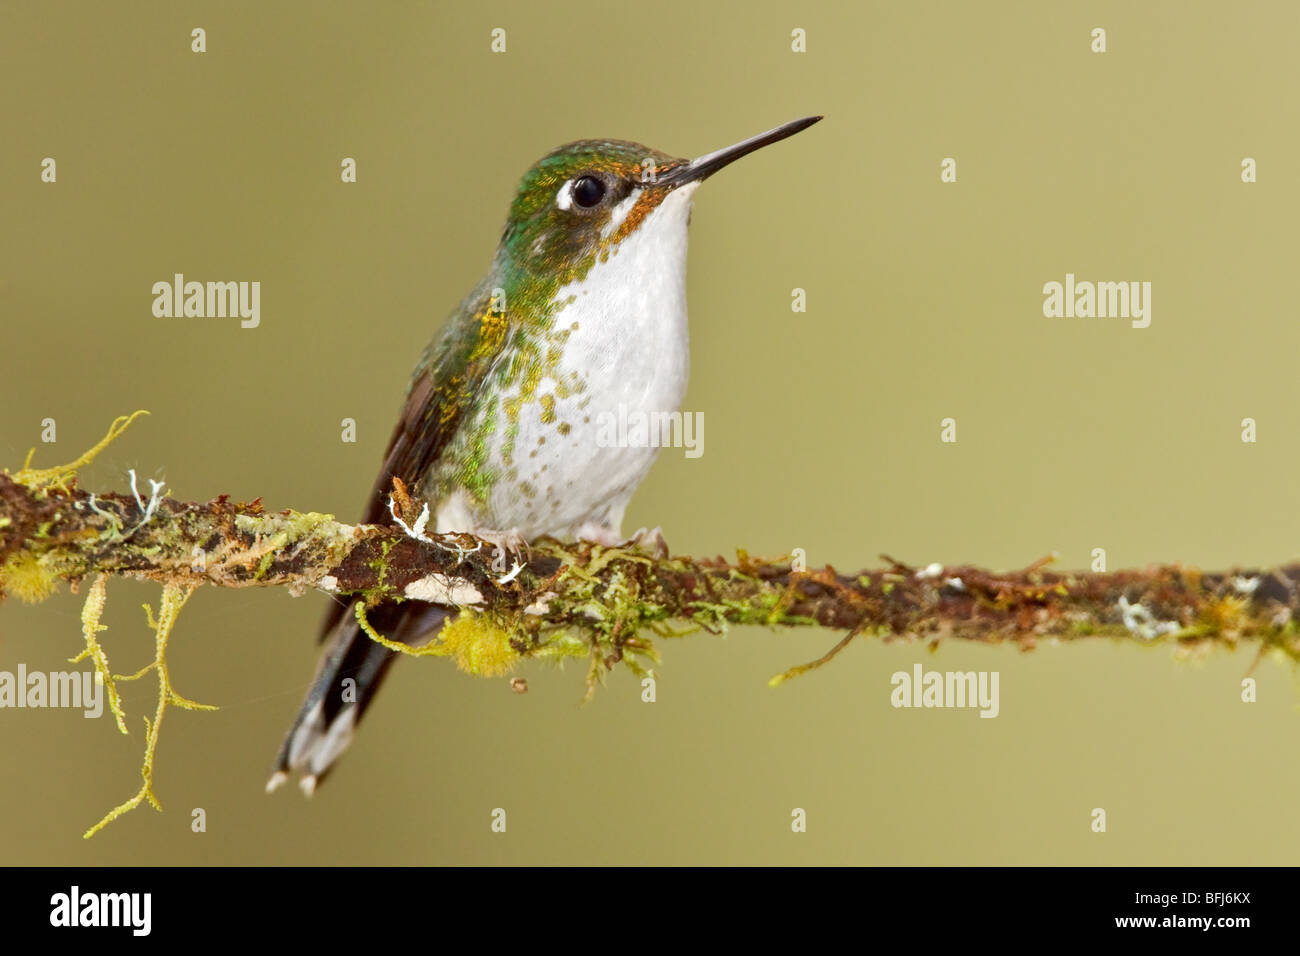 A Booted Racket-tail hummingbird (Ocreatus underwoodii) perched on a branch in the Tandayapa Valley of Ecuador. Stock Photo